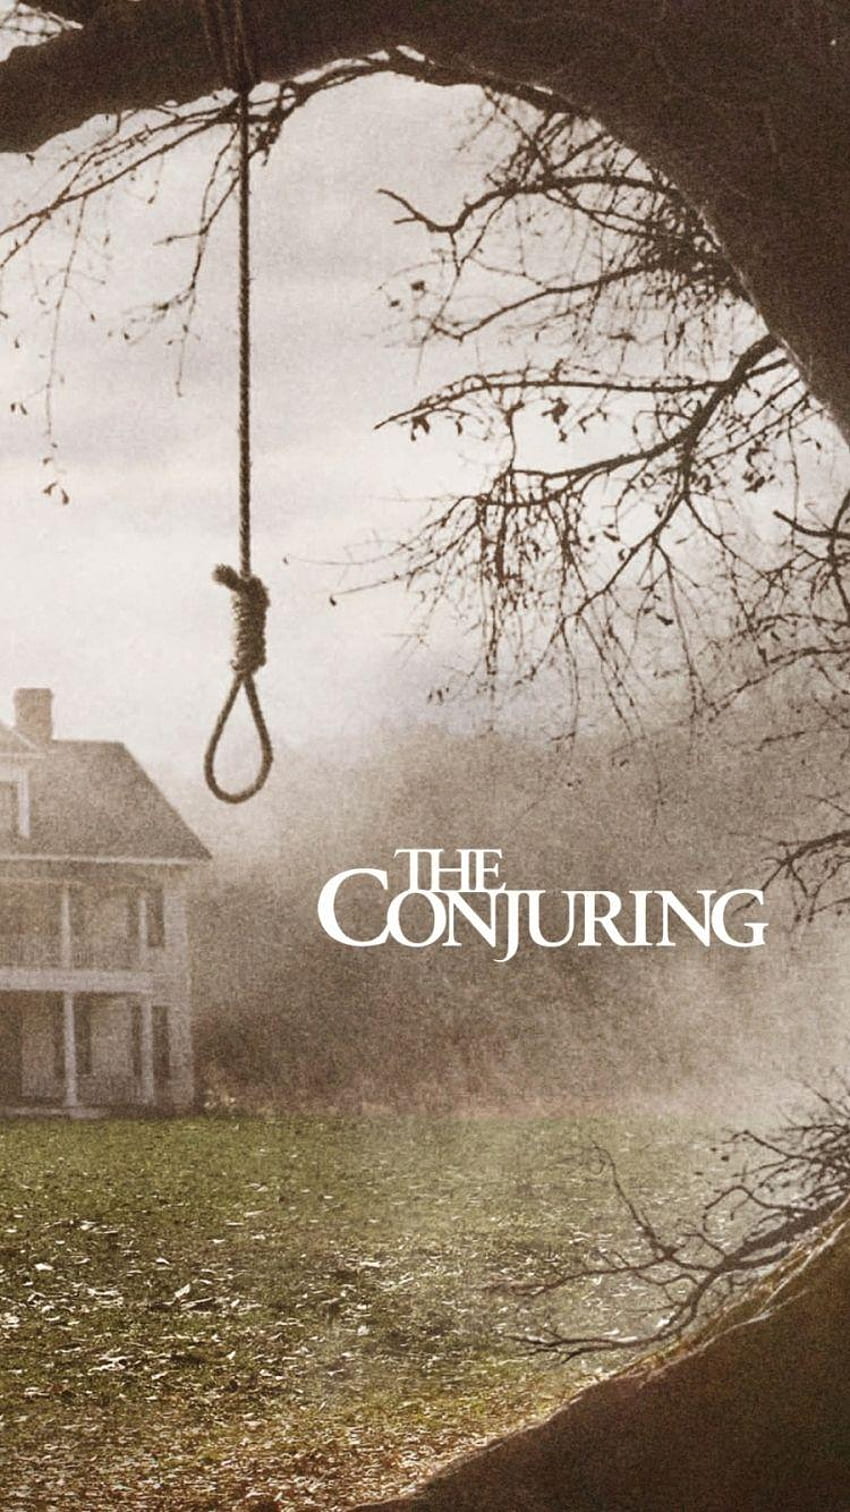 IPhone 6 - Movie The Conjuring - Id - Noose On A HD phone wallpaper